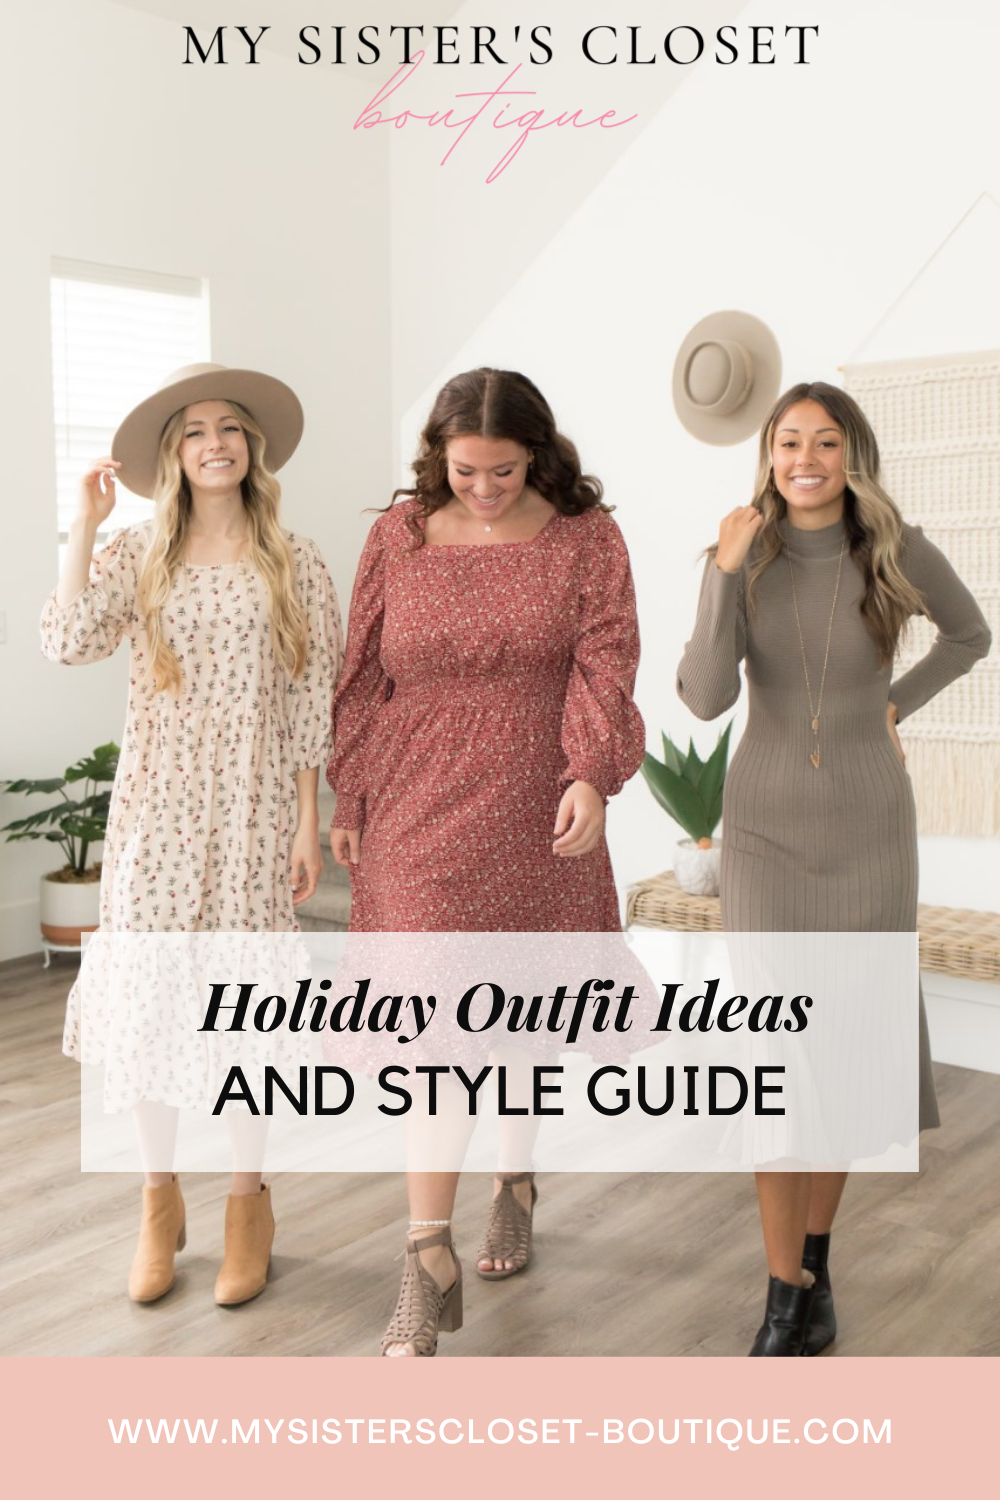 Holiday Style Guide – My Sister's Closet